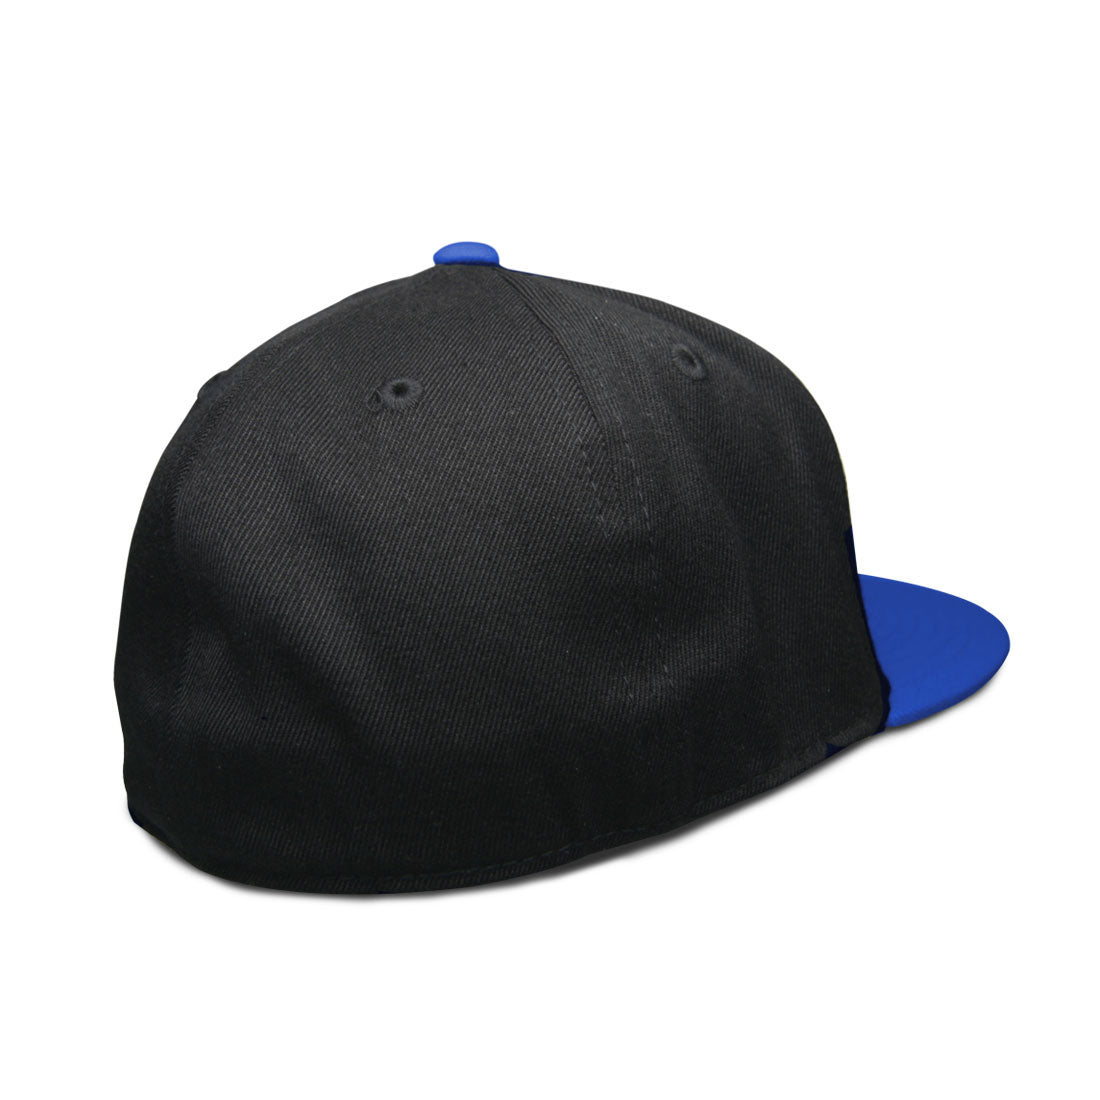 RIZNWILD | Fitted hat back view royal/black 